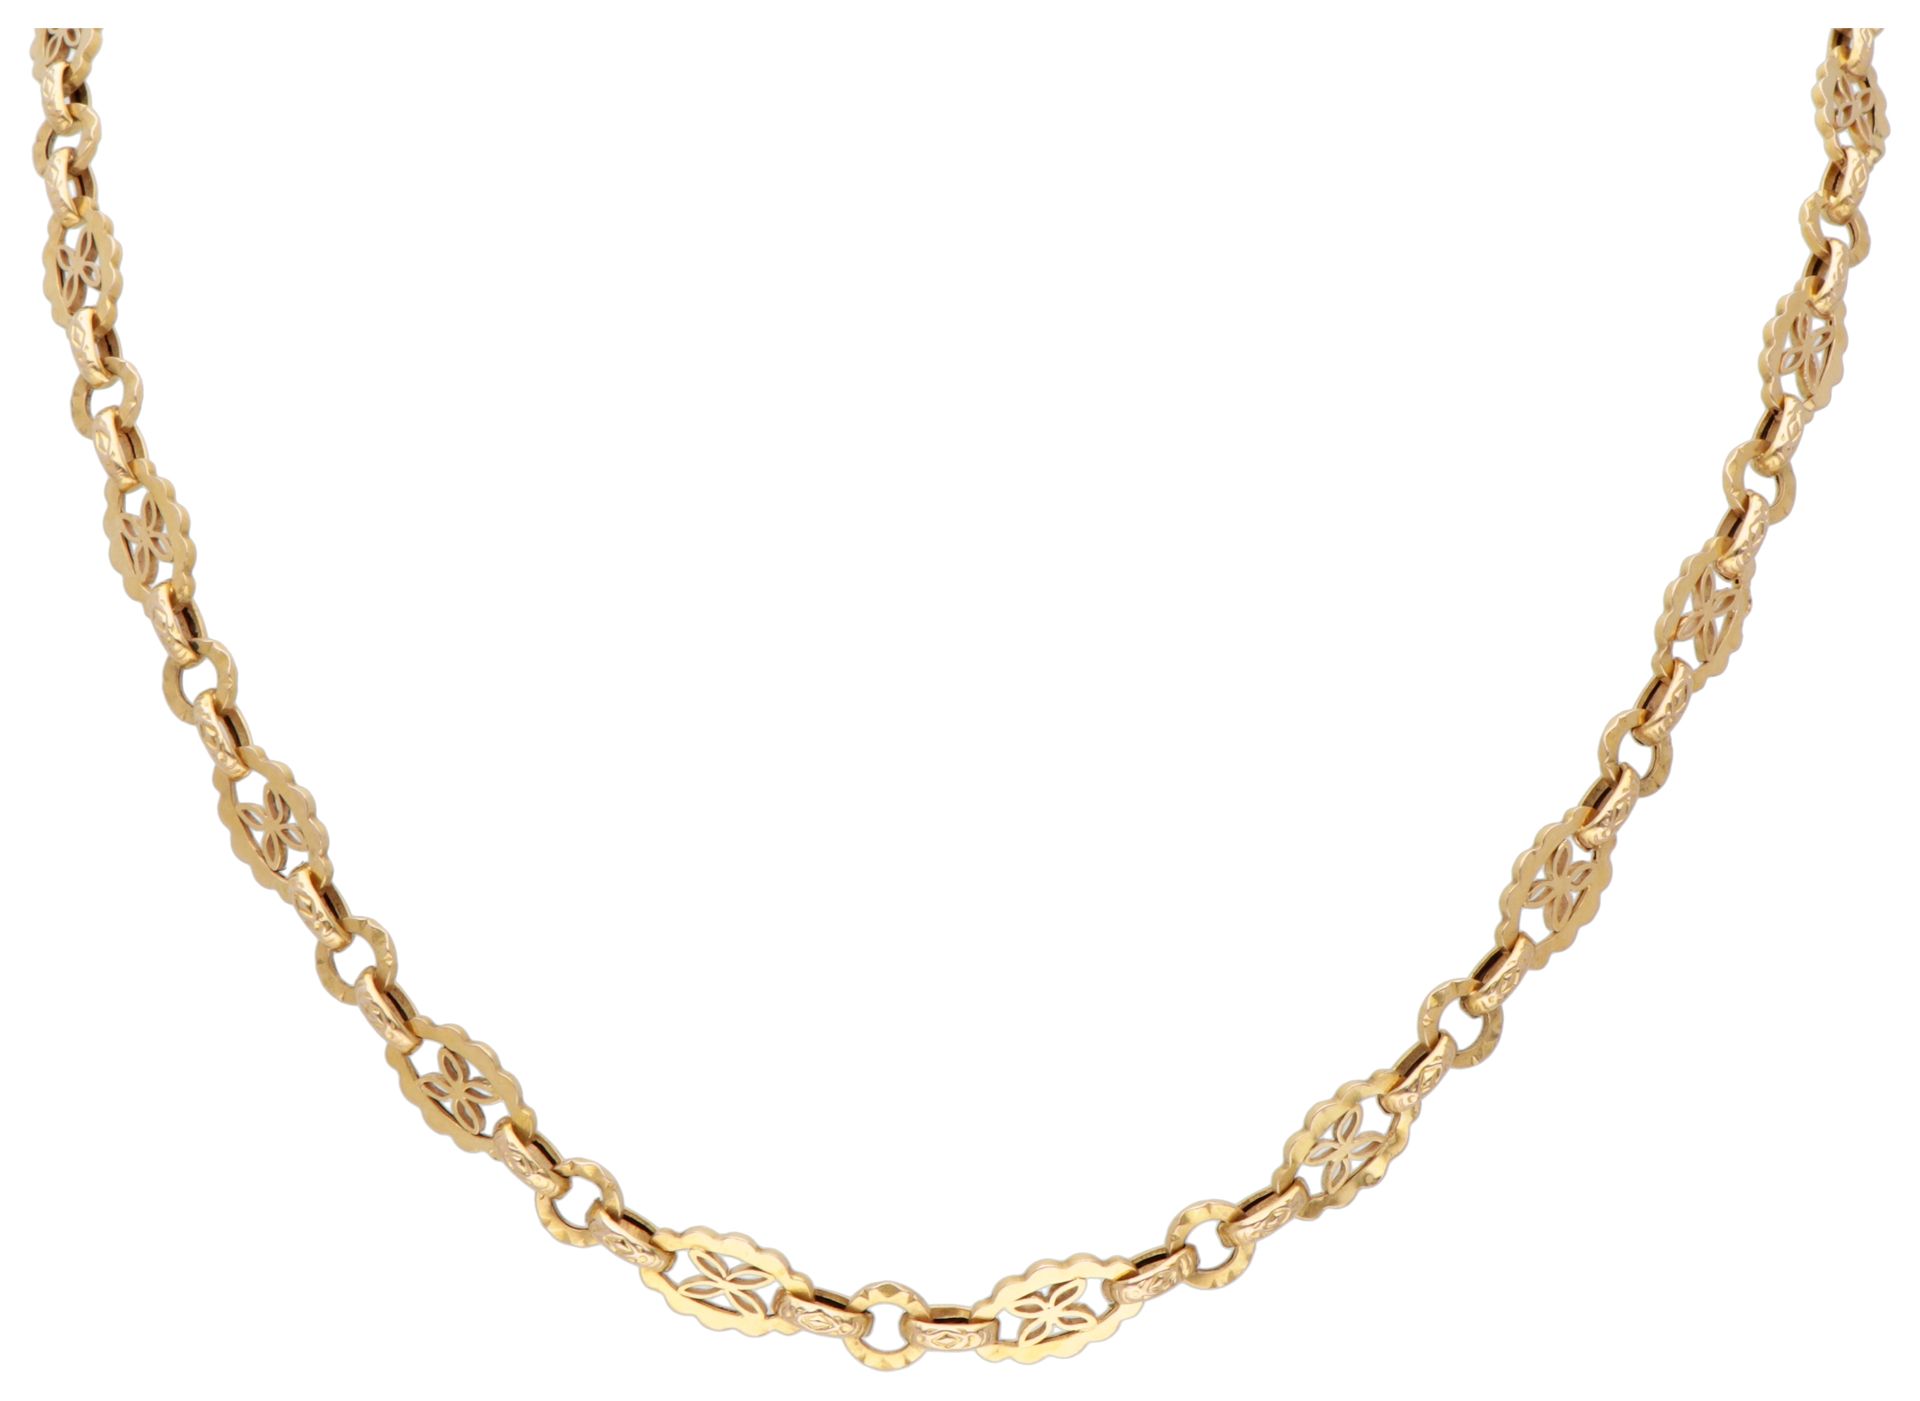 18K. Yellow gold link necklace with ornate details. Sellos: 750. L: 78 cm, ancho&hellip;